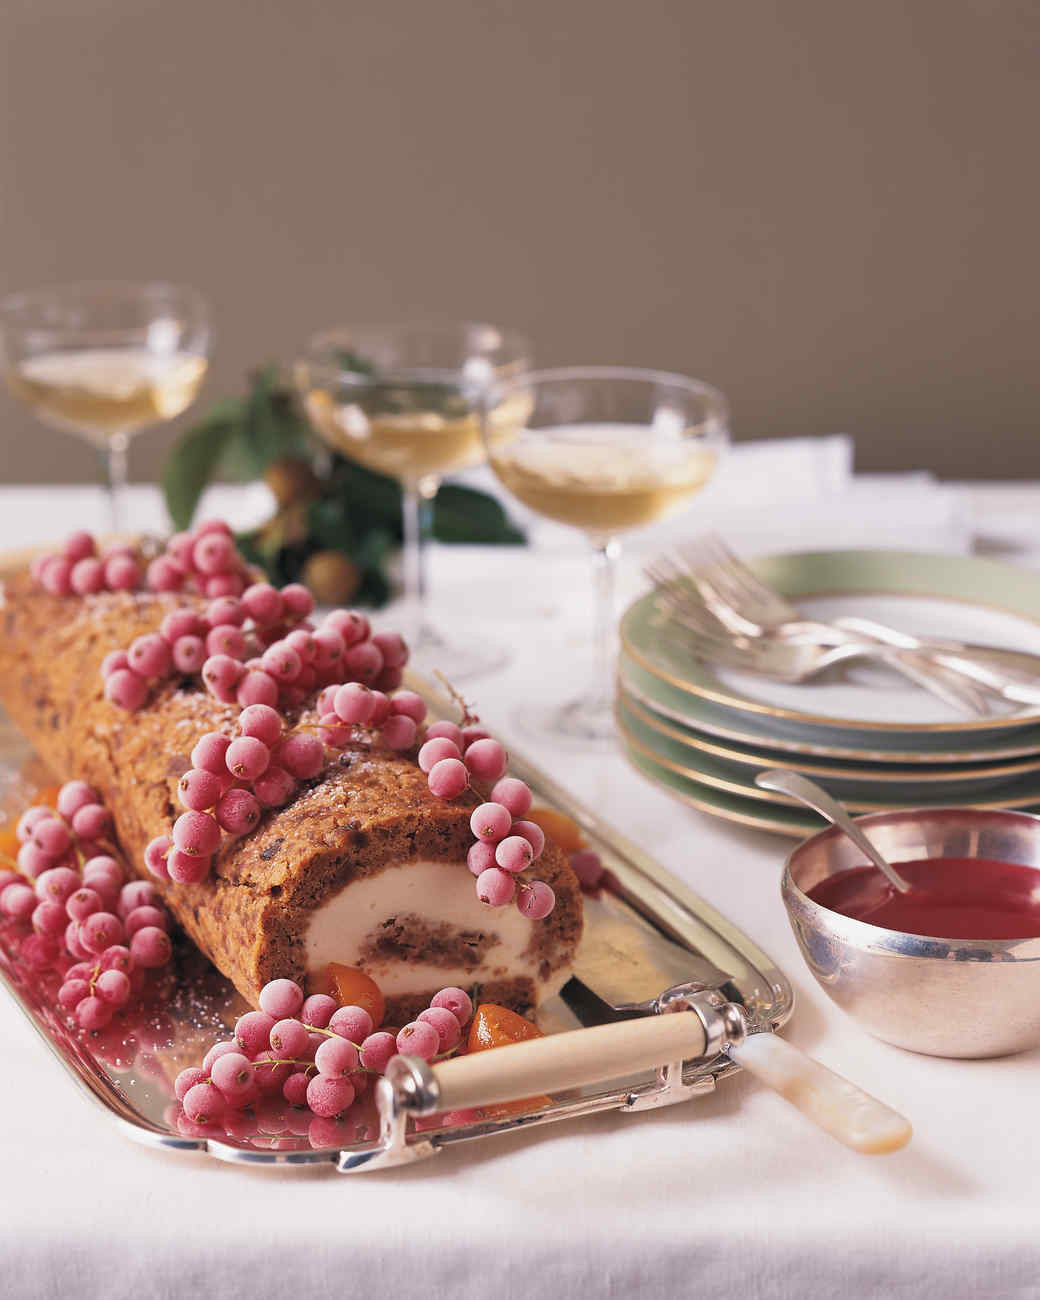 Best Christmas Desserts
 20 Years of Living The Best Christmas Desserts